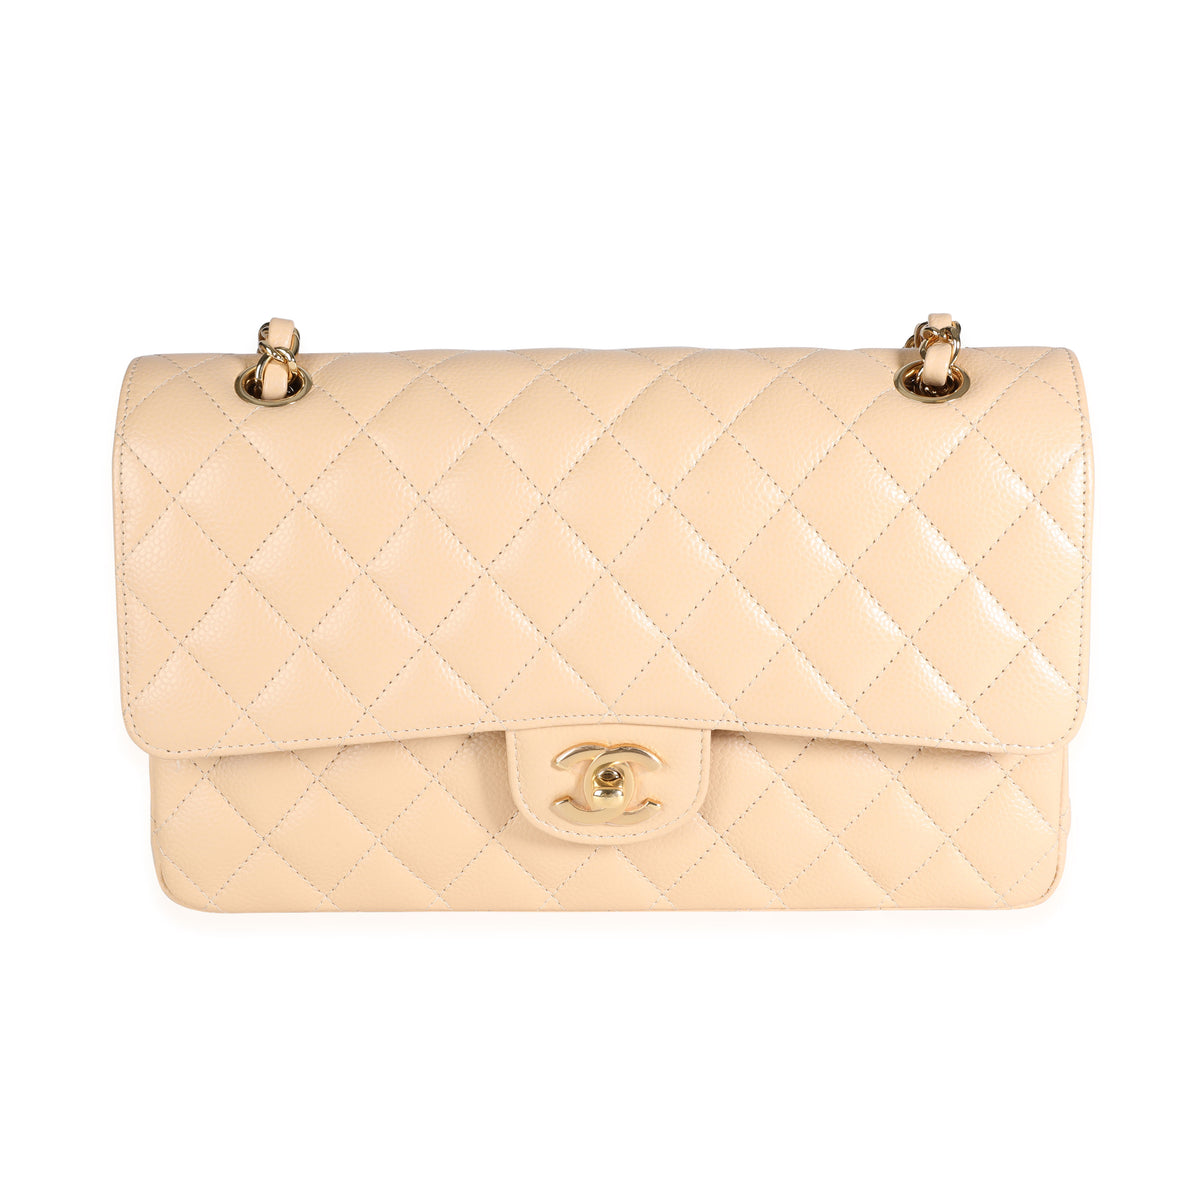 Chanel Beige Quilted Caviar Medium Classic Double Flap Bag, myGemma